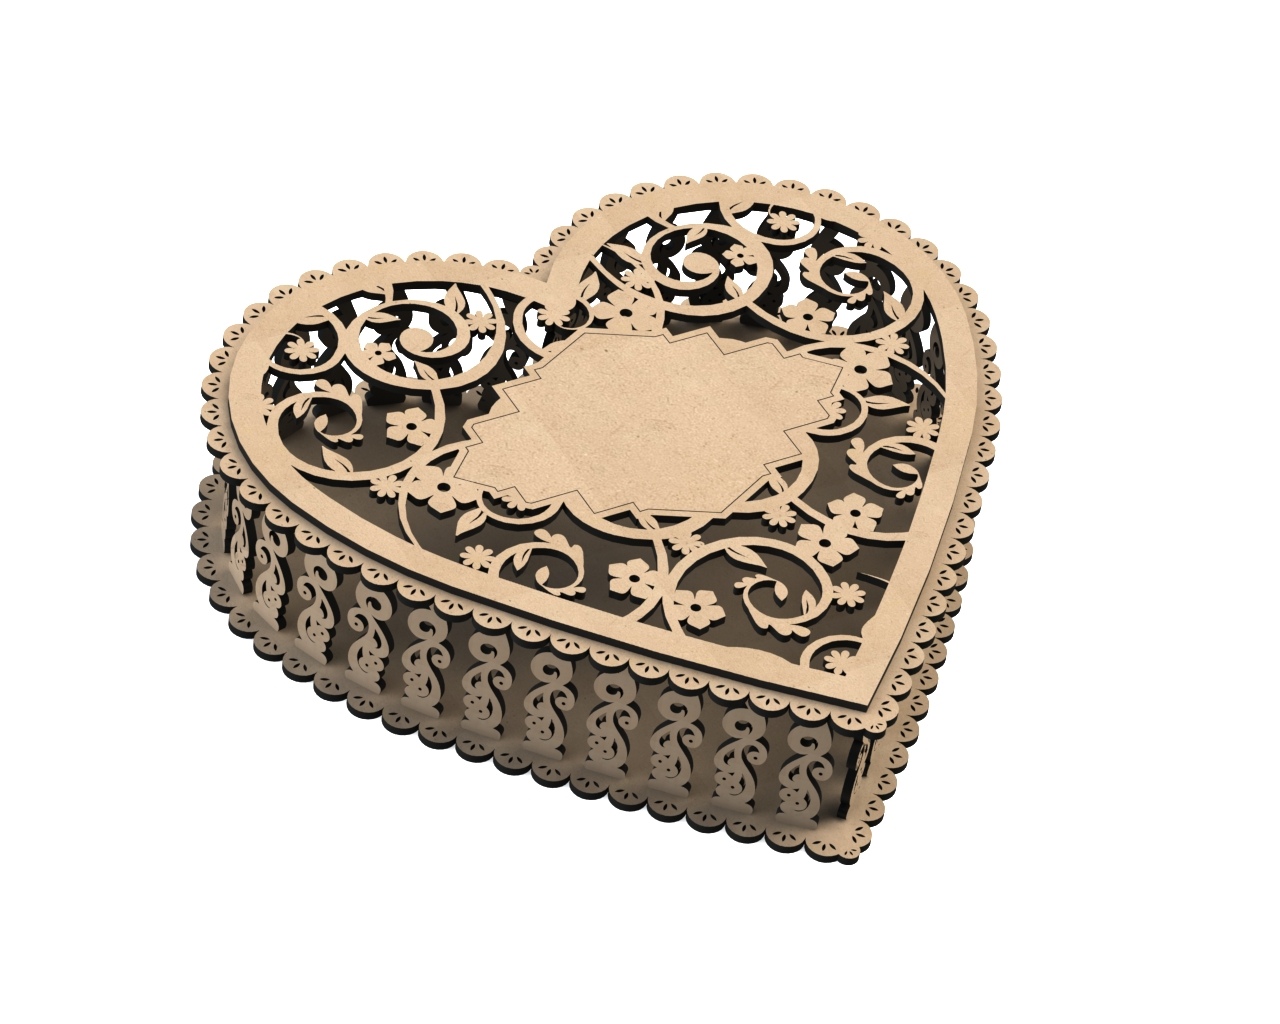 laser-cut-jewelry-box-free-vector-cdr-download-3axis-co